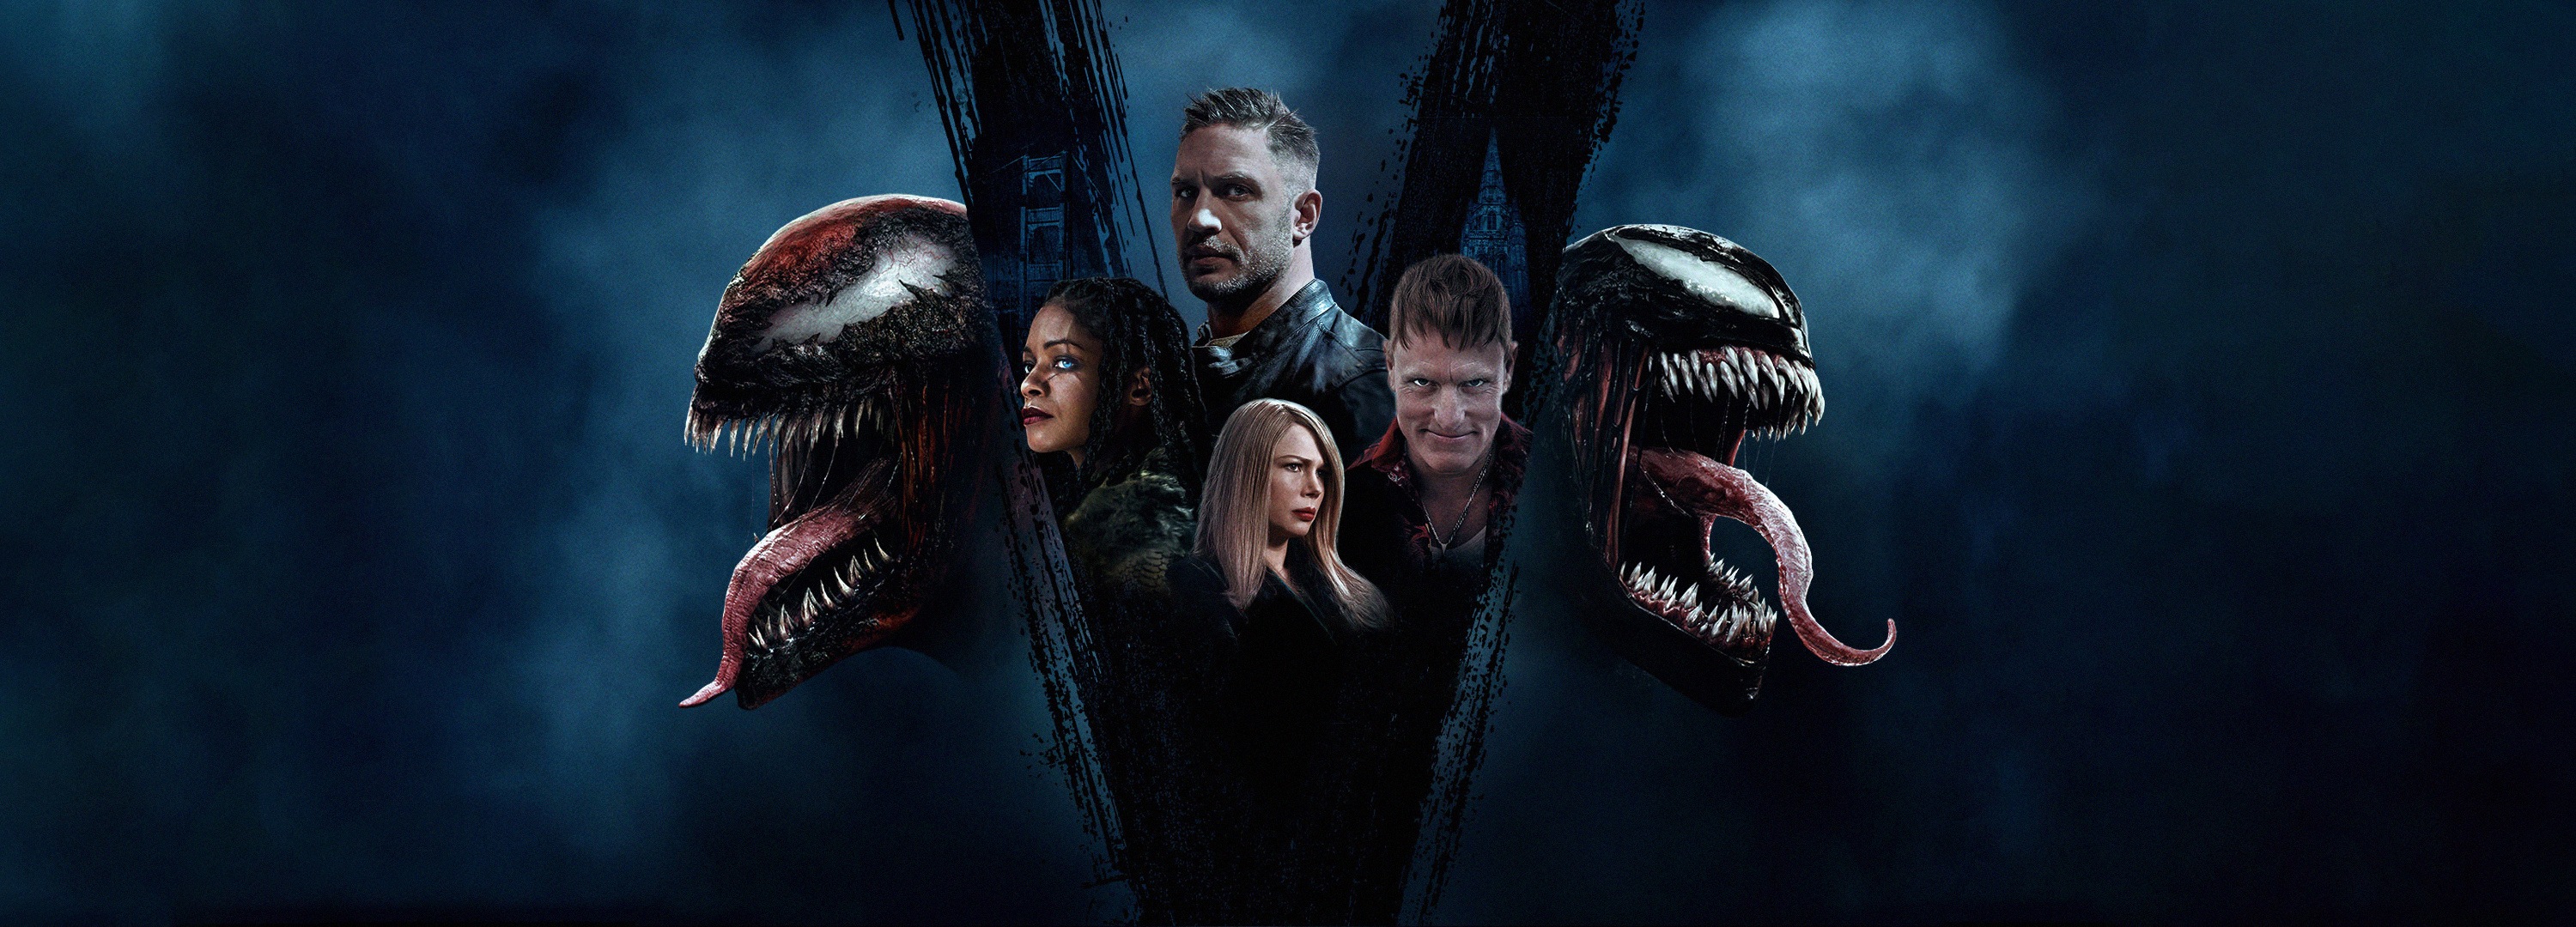 Venom Let There Be Carnage, Woody Harrelson, HD Wallpapers, 3000x1080 Dual Screen Desktop